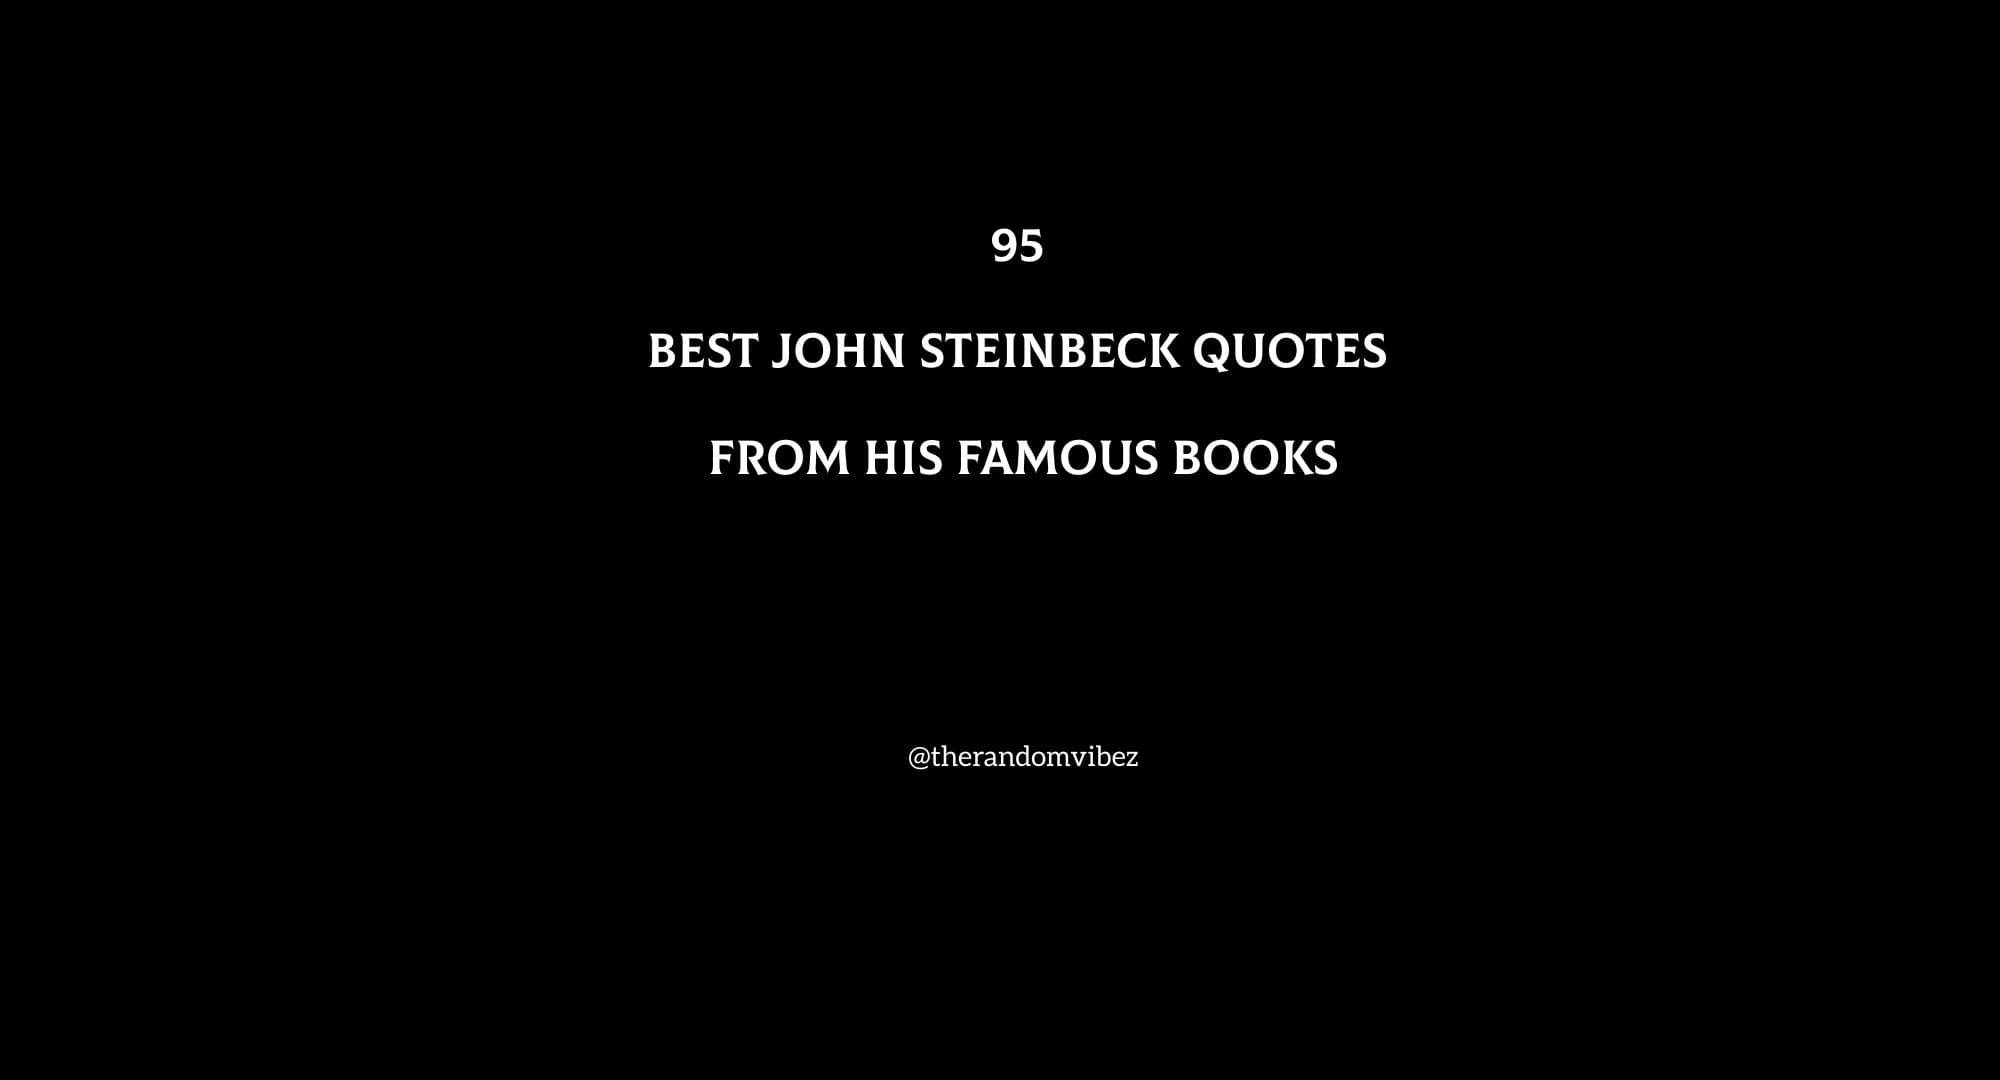 95 Best John Steinbeck Quotes From His Famous Books